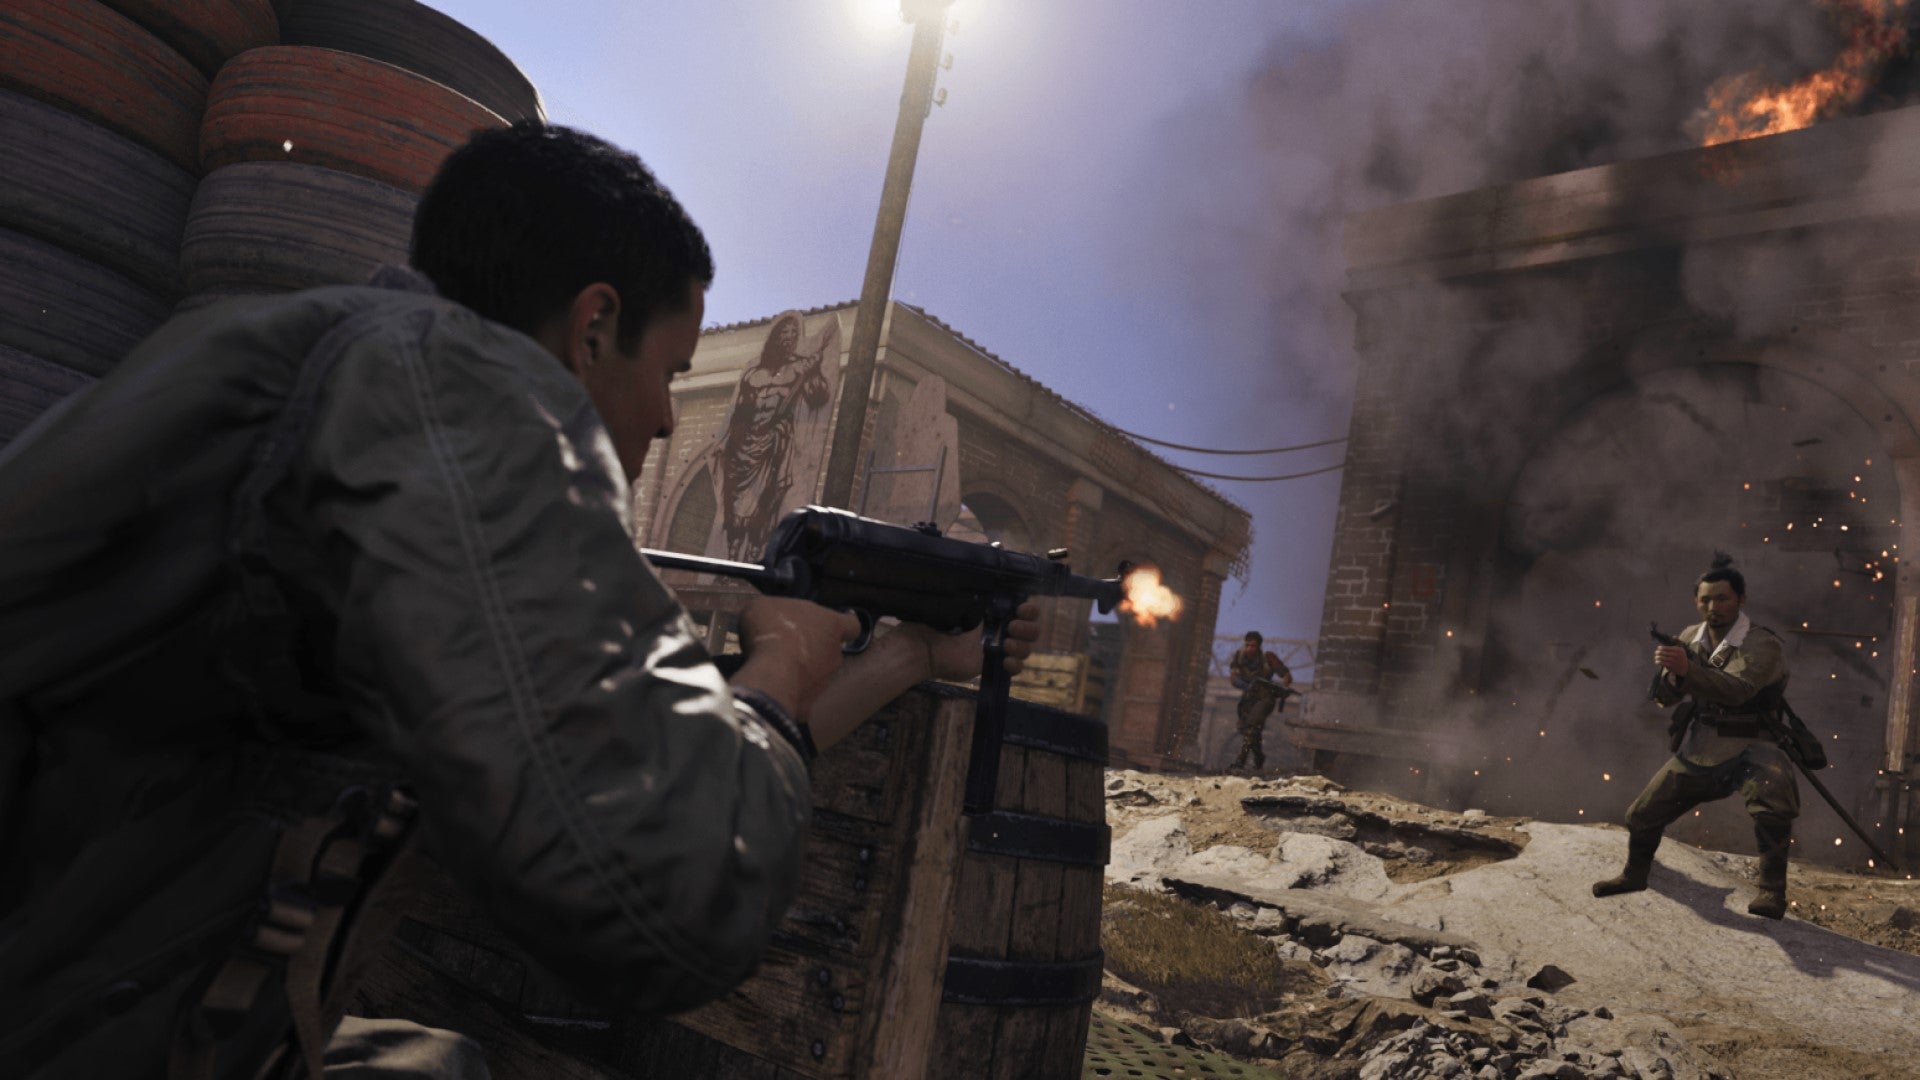 A soldier aims at another in Call Of Duty Vanguard, as an explosion goes off in the background.